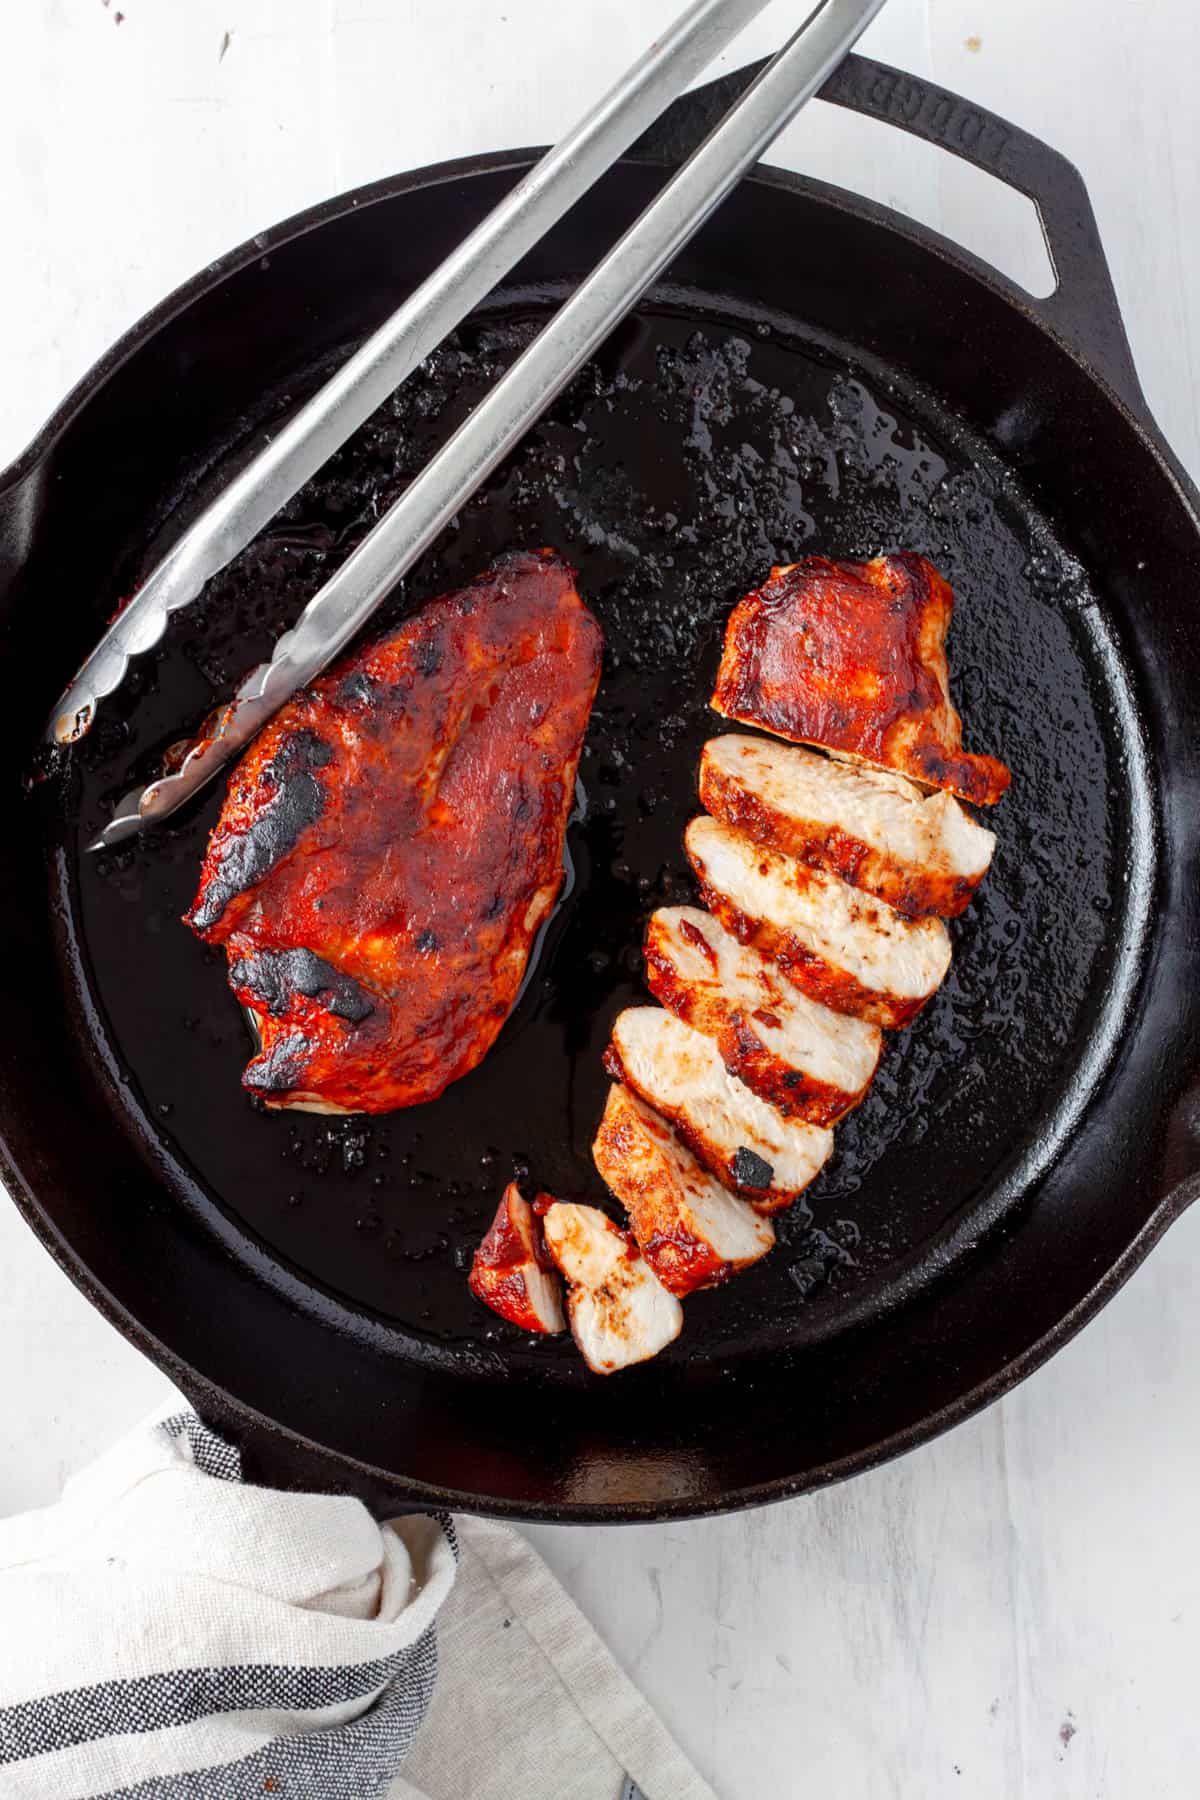 How to Grill With a Cast-Iron Pan